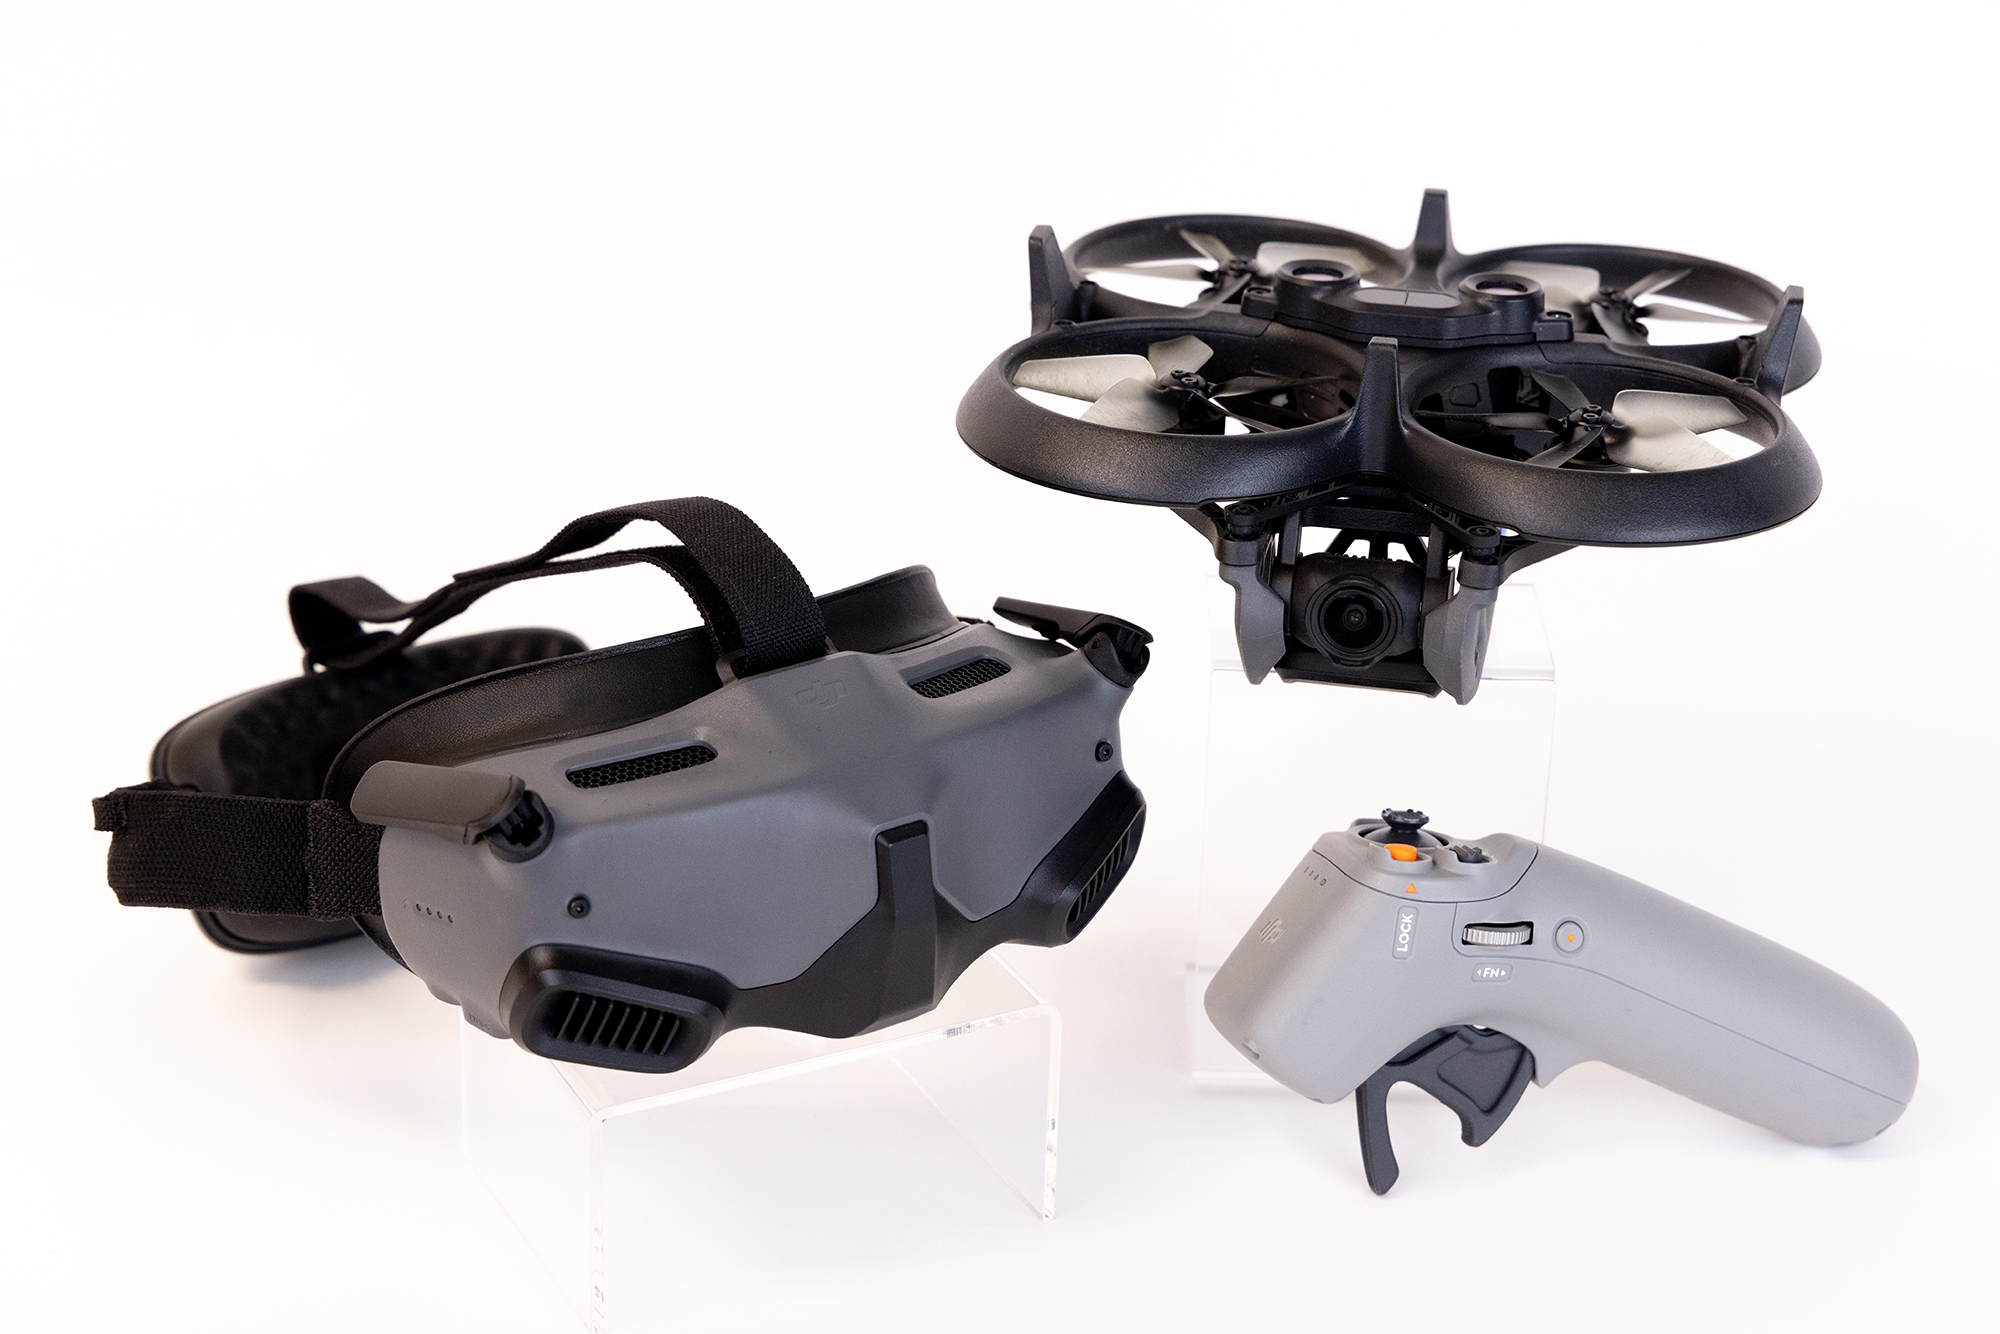 DJI's Second FPV Drone, the Avata, Is Smaller and Safer to Fly